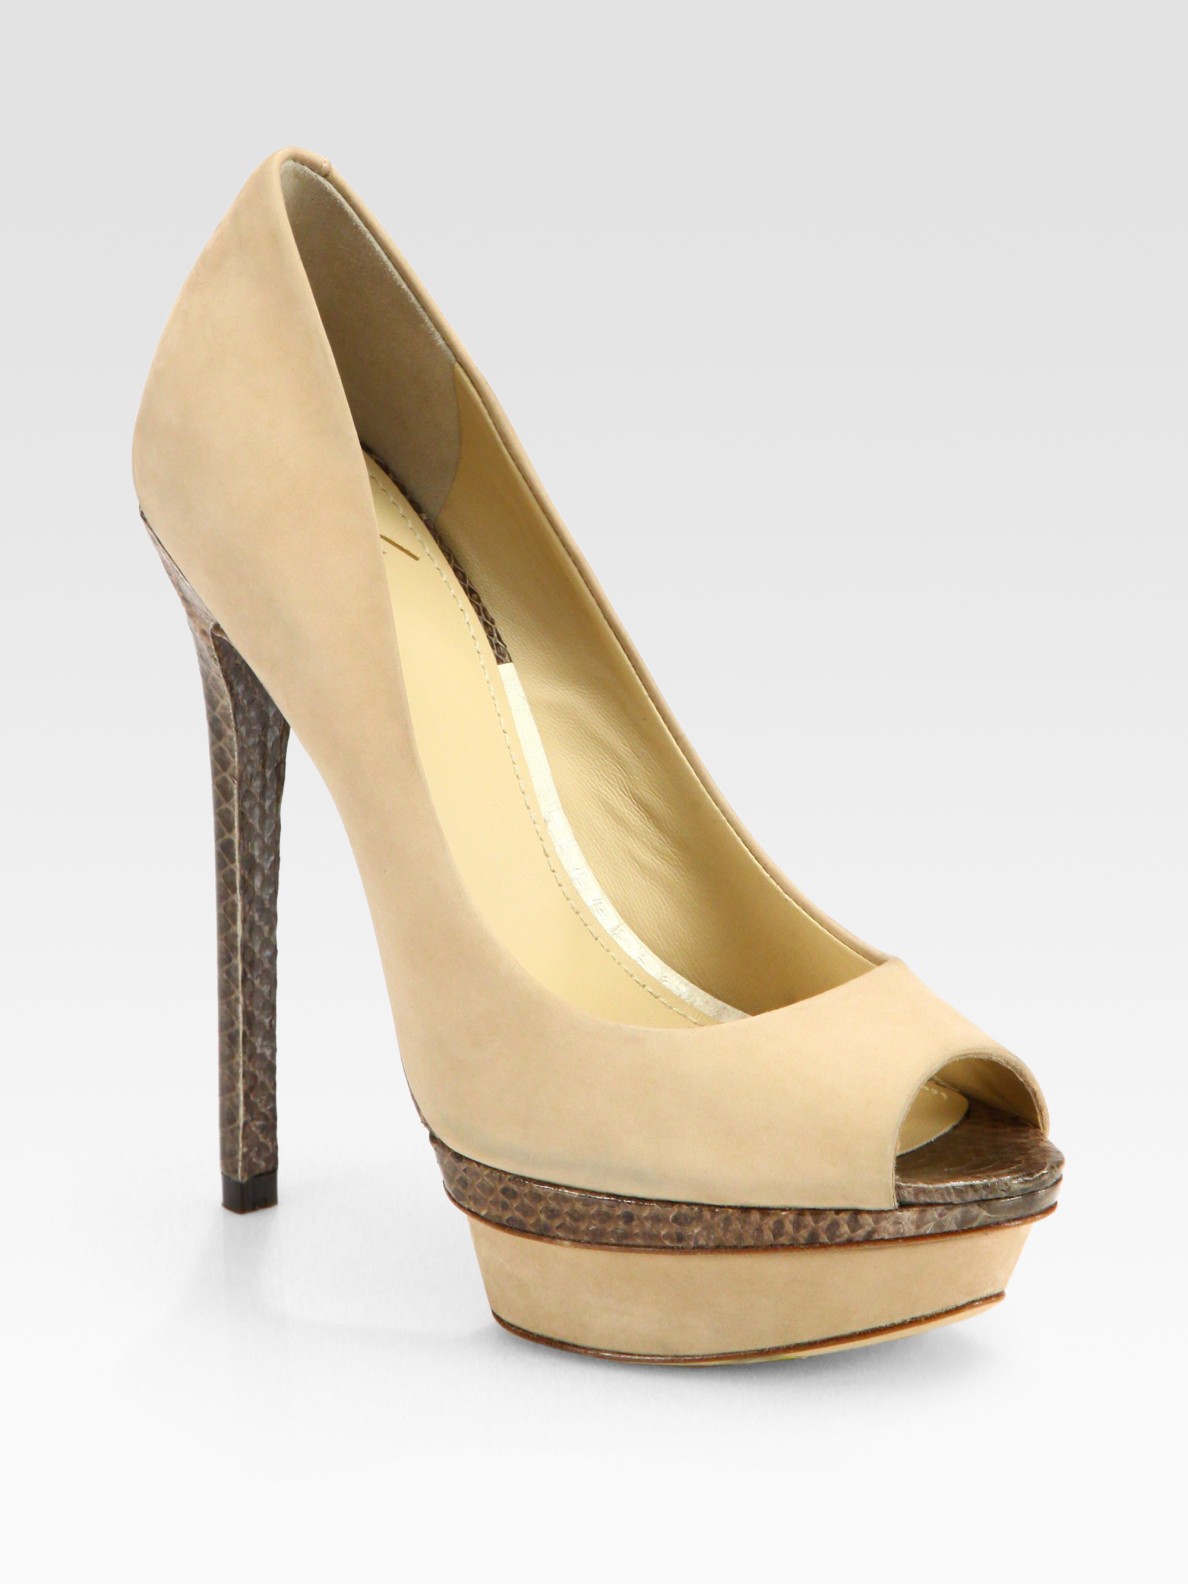 B brian atwood Snakeprint Leather and Suede Platform Pumps in Natural ...